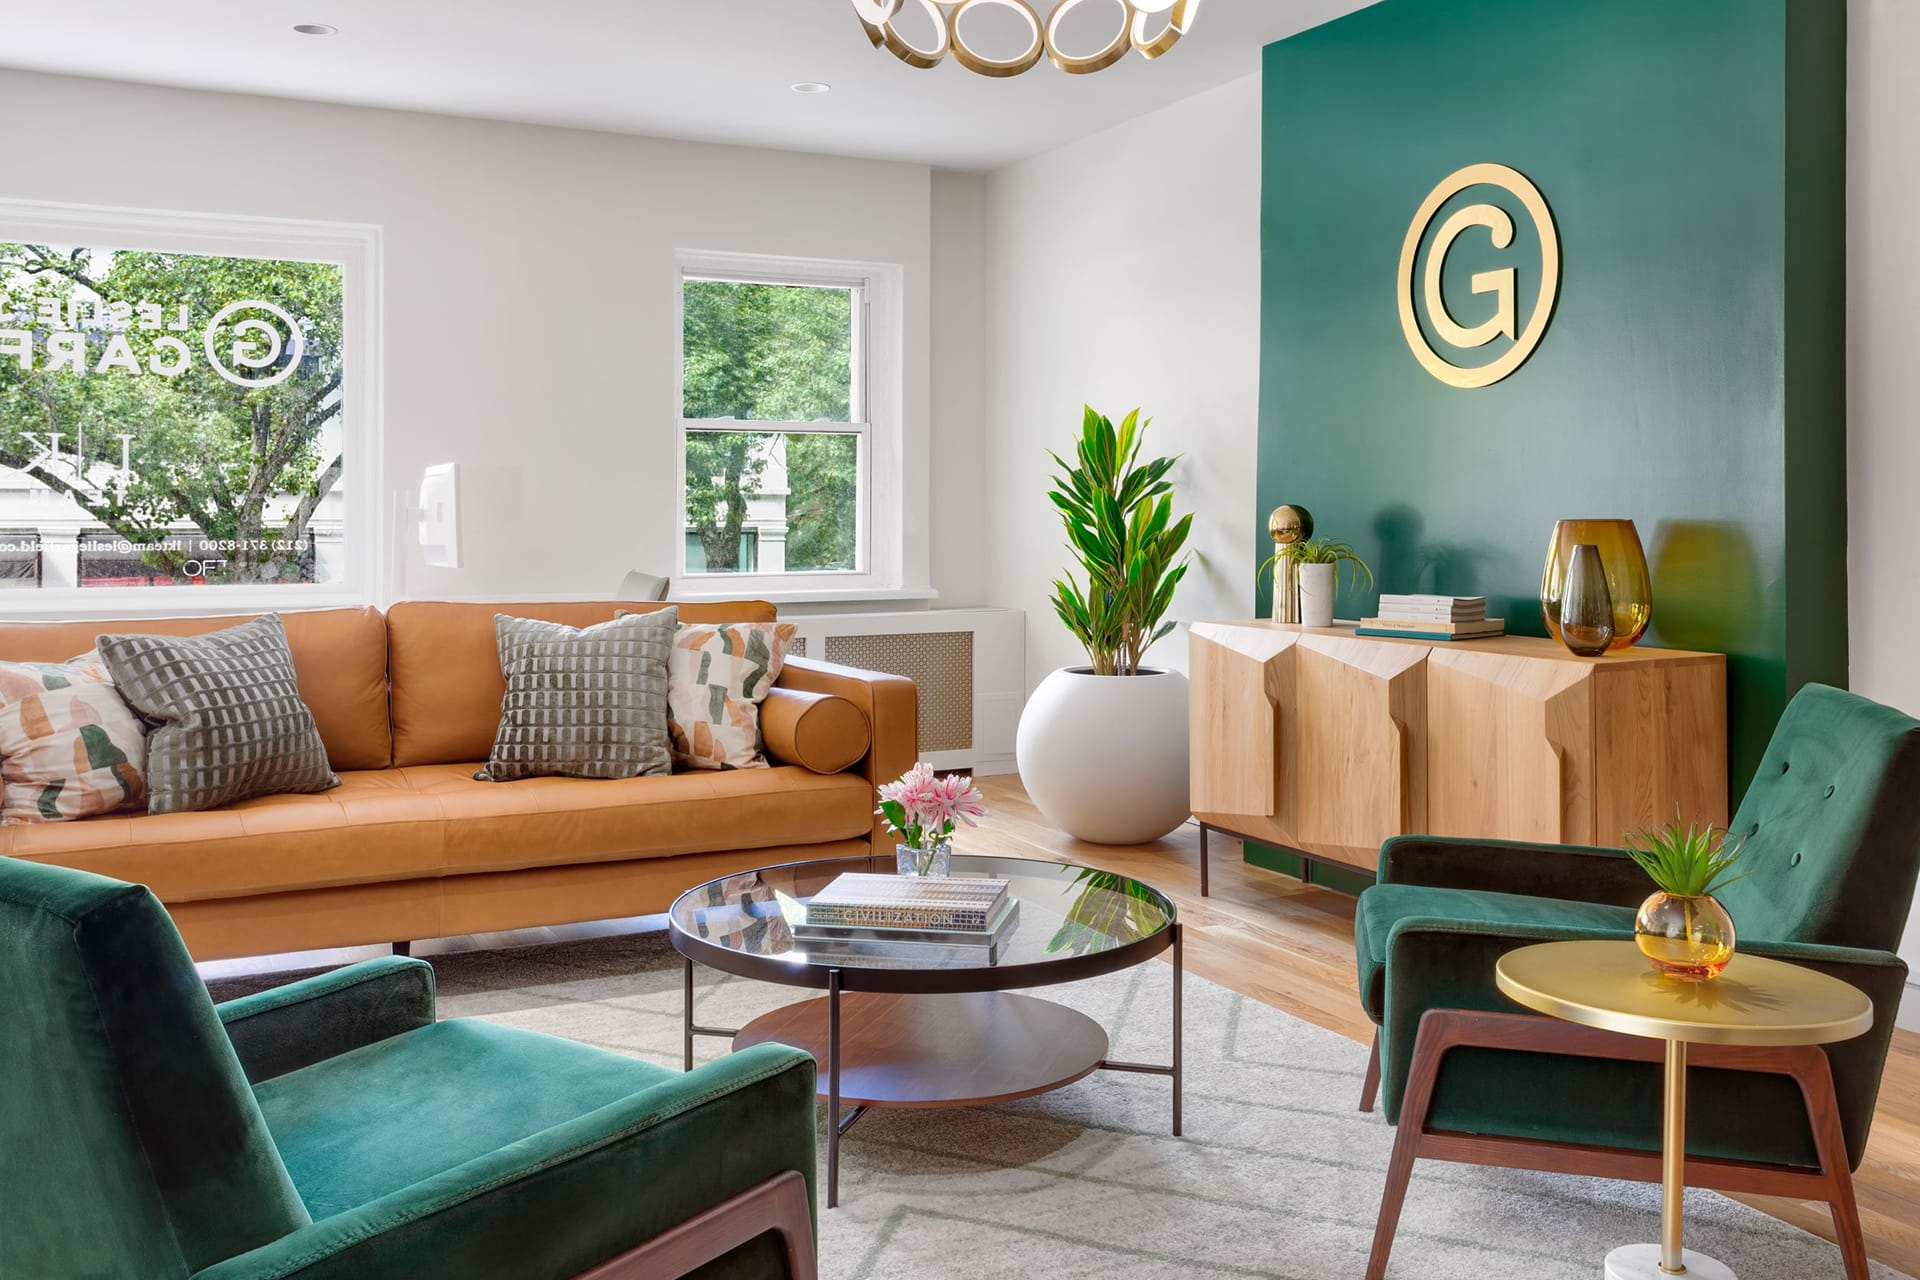 Lobby of a Brooklyn Heights real estate office with a green accent wall, wood credenza, two green velvet arm chairs, a glass coffee table, and a bright leather couch.